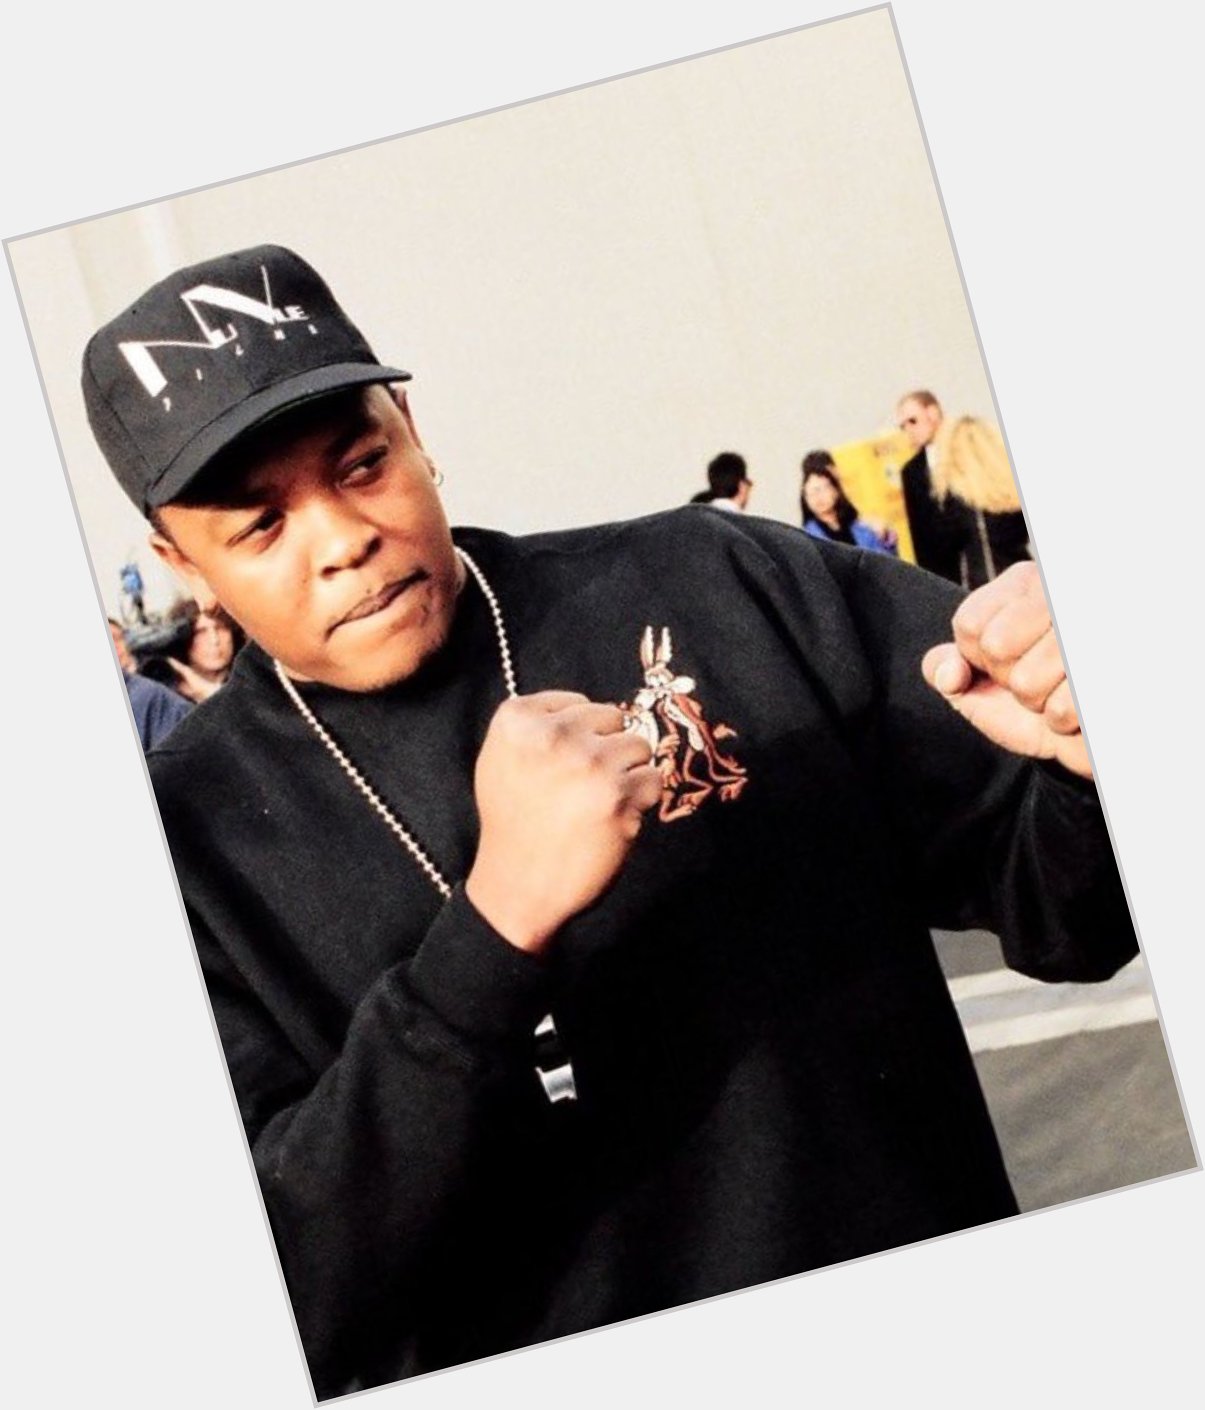 52 years ago today, Andre Romelle Young was born. Happy birthday Dr. Dre! 